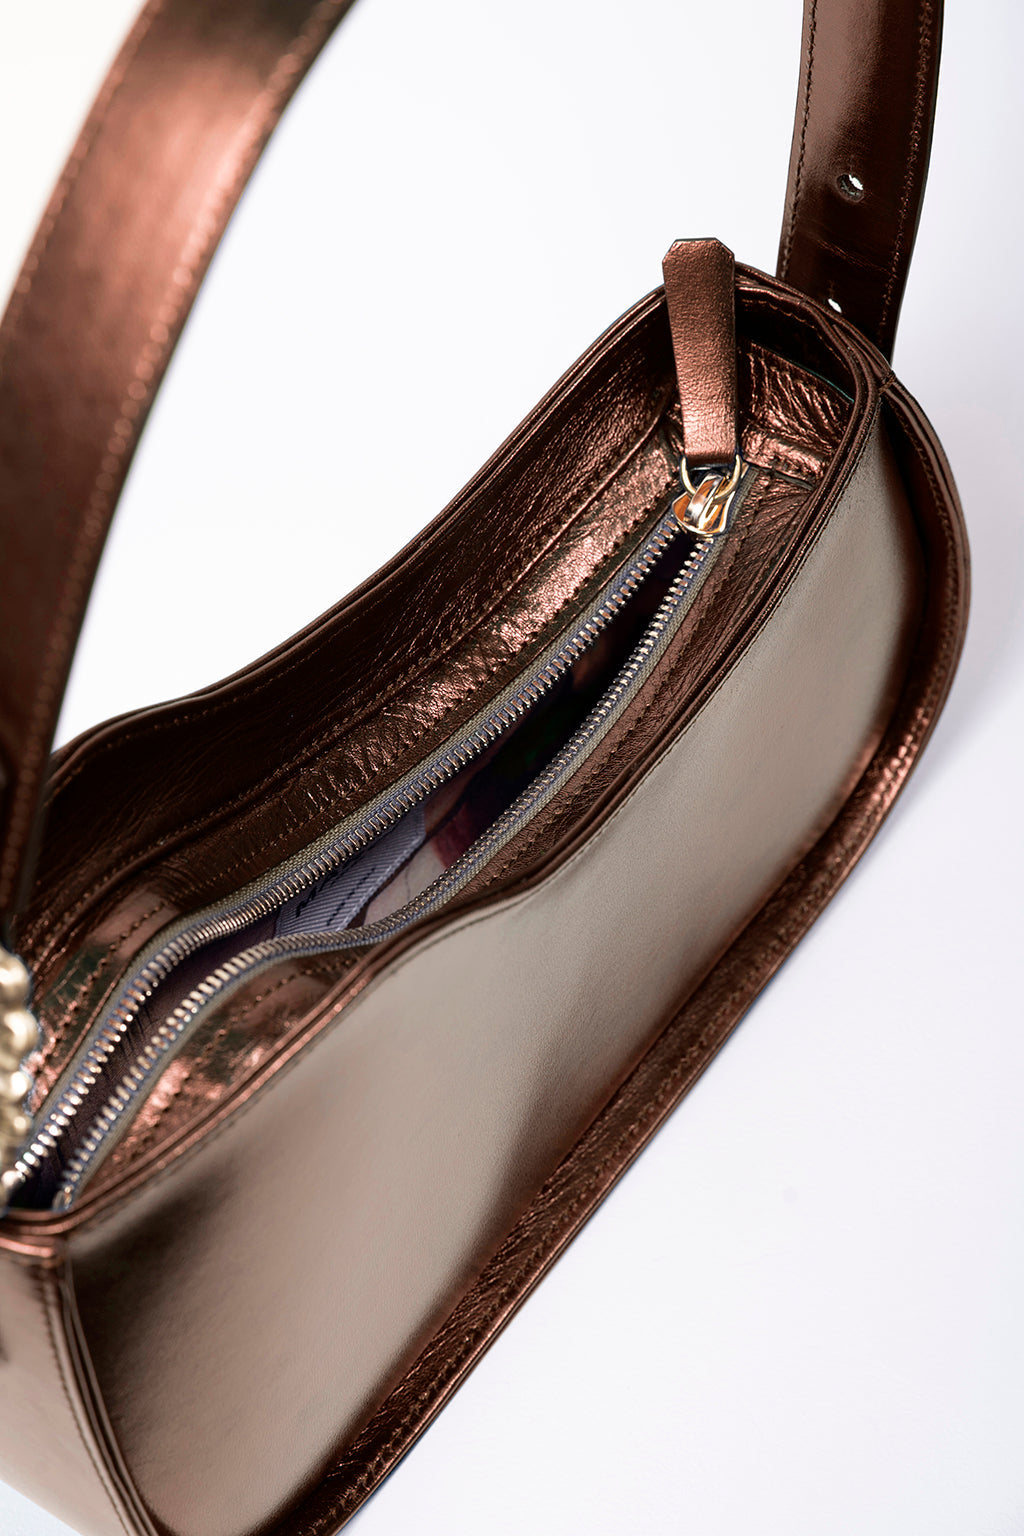 Onda Shimmering Calf Leather Baguette by Marco Trevisan